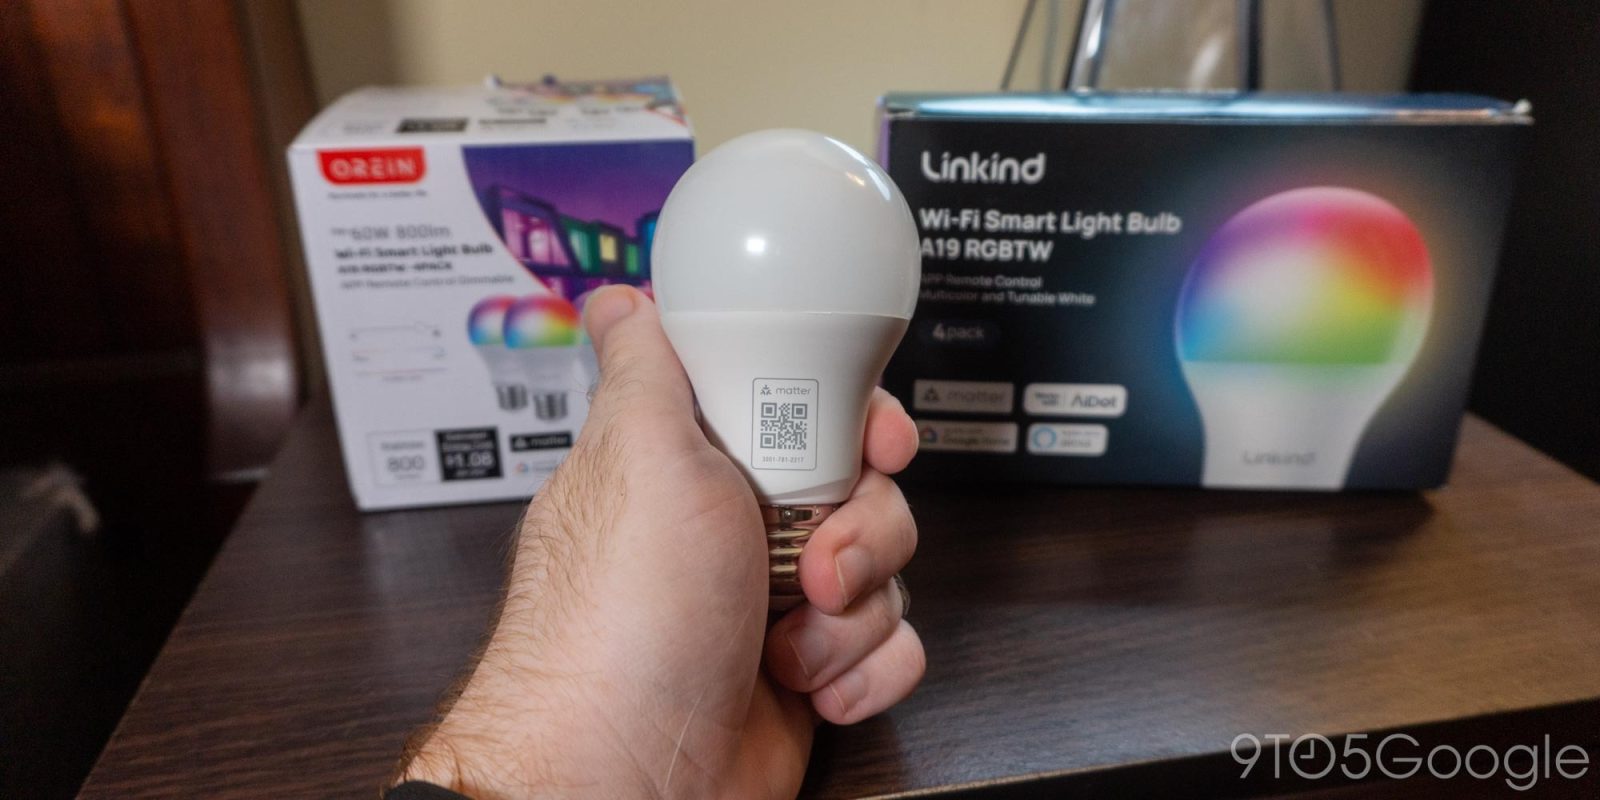 Hands-on: AiDot smart lights with Matter are easy, fun, and affordable